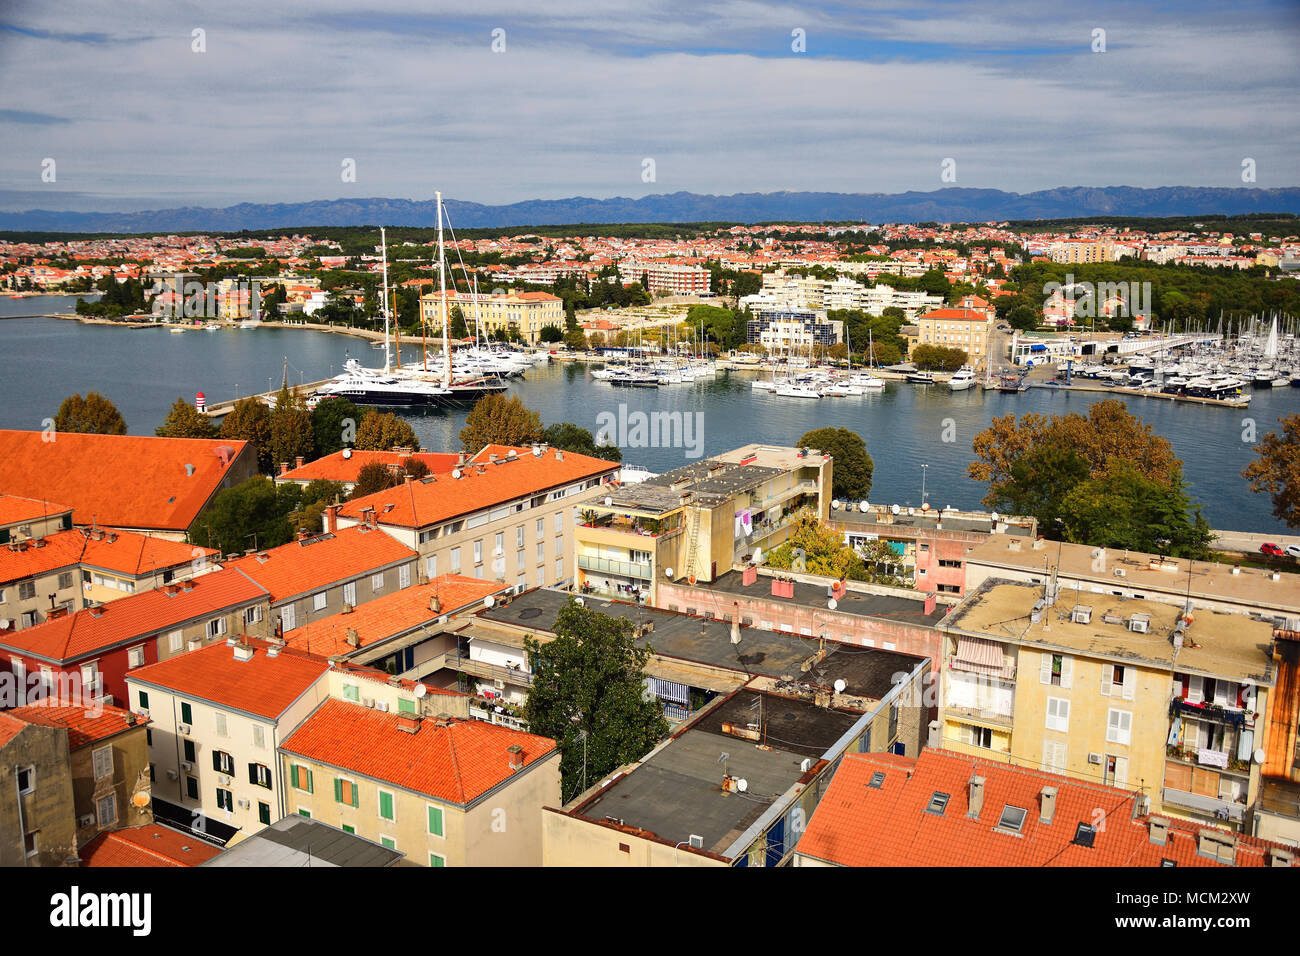 Aerial view of Zadar - famous historic Croatian city. Stock Photo